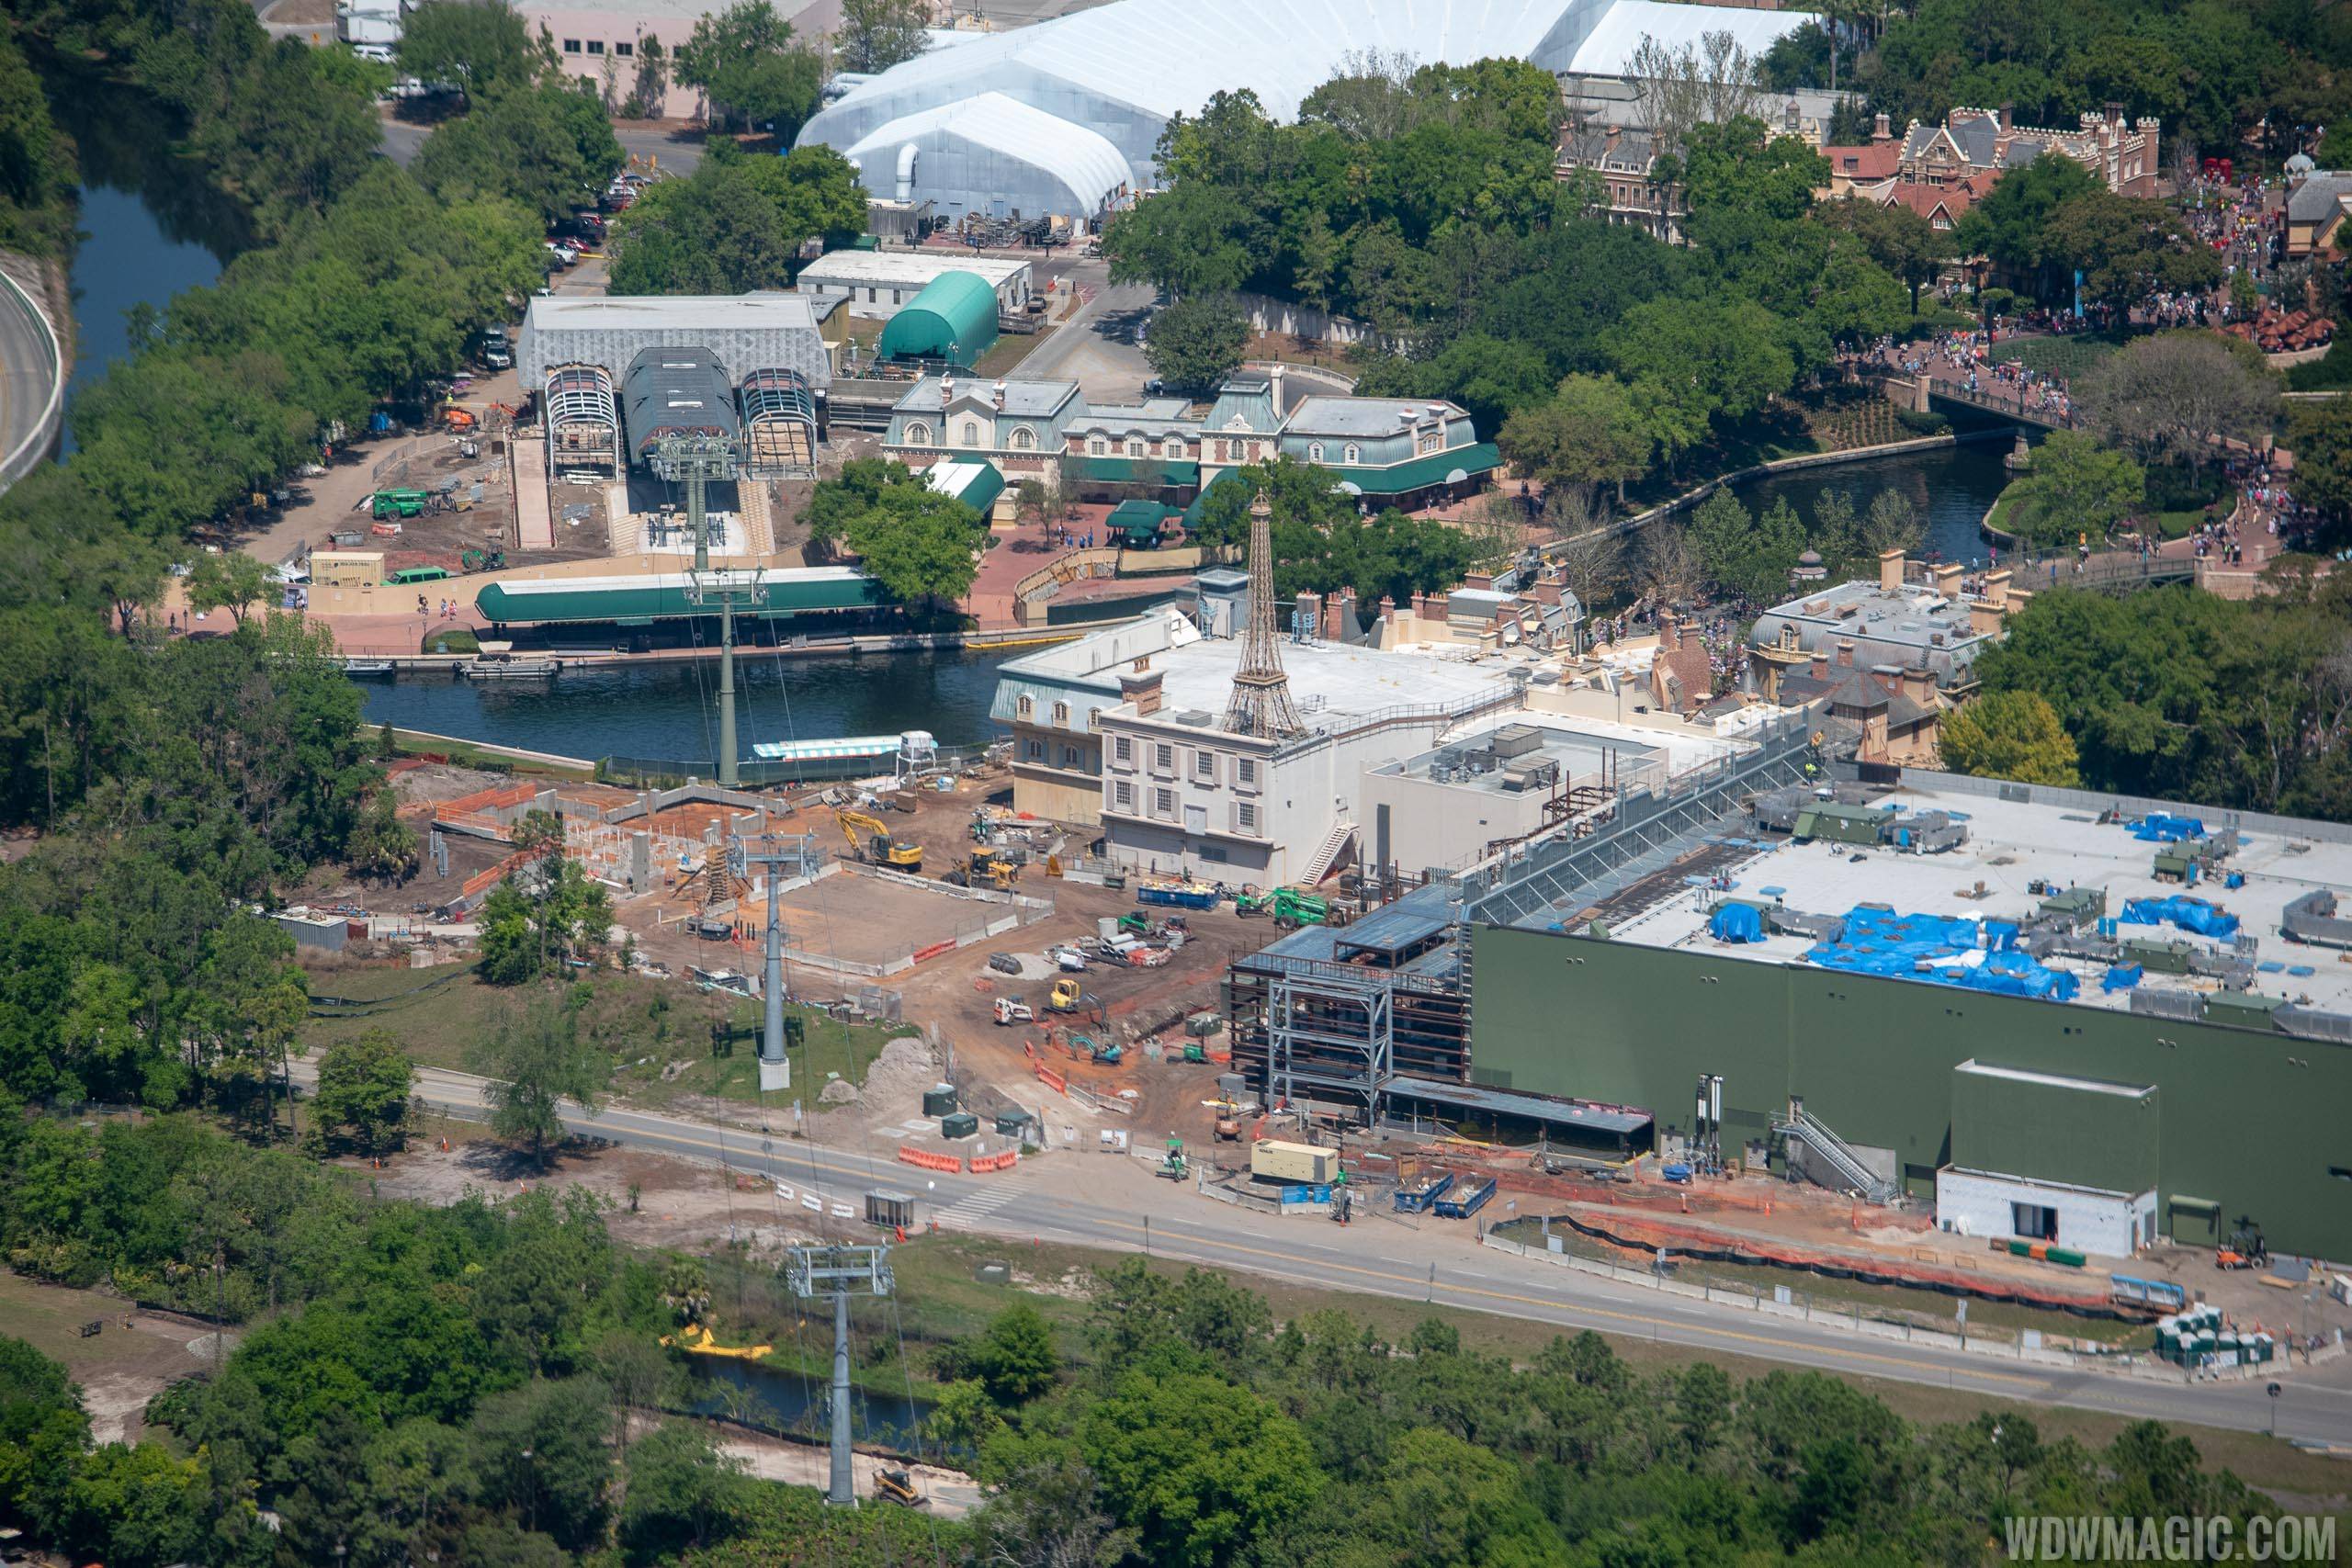 PHOTOS - Latest look at Remy's Ratatouille Adventure